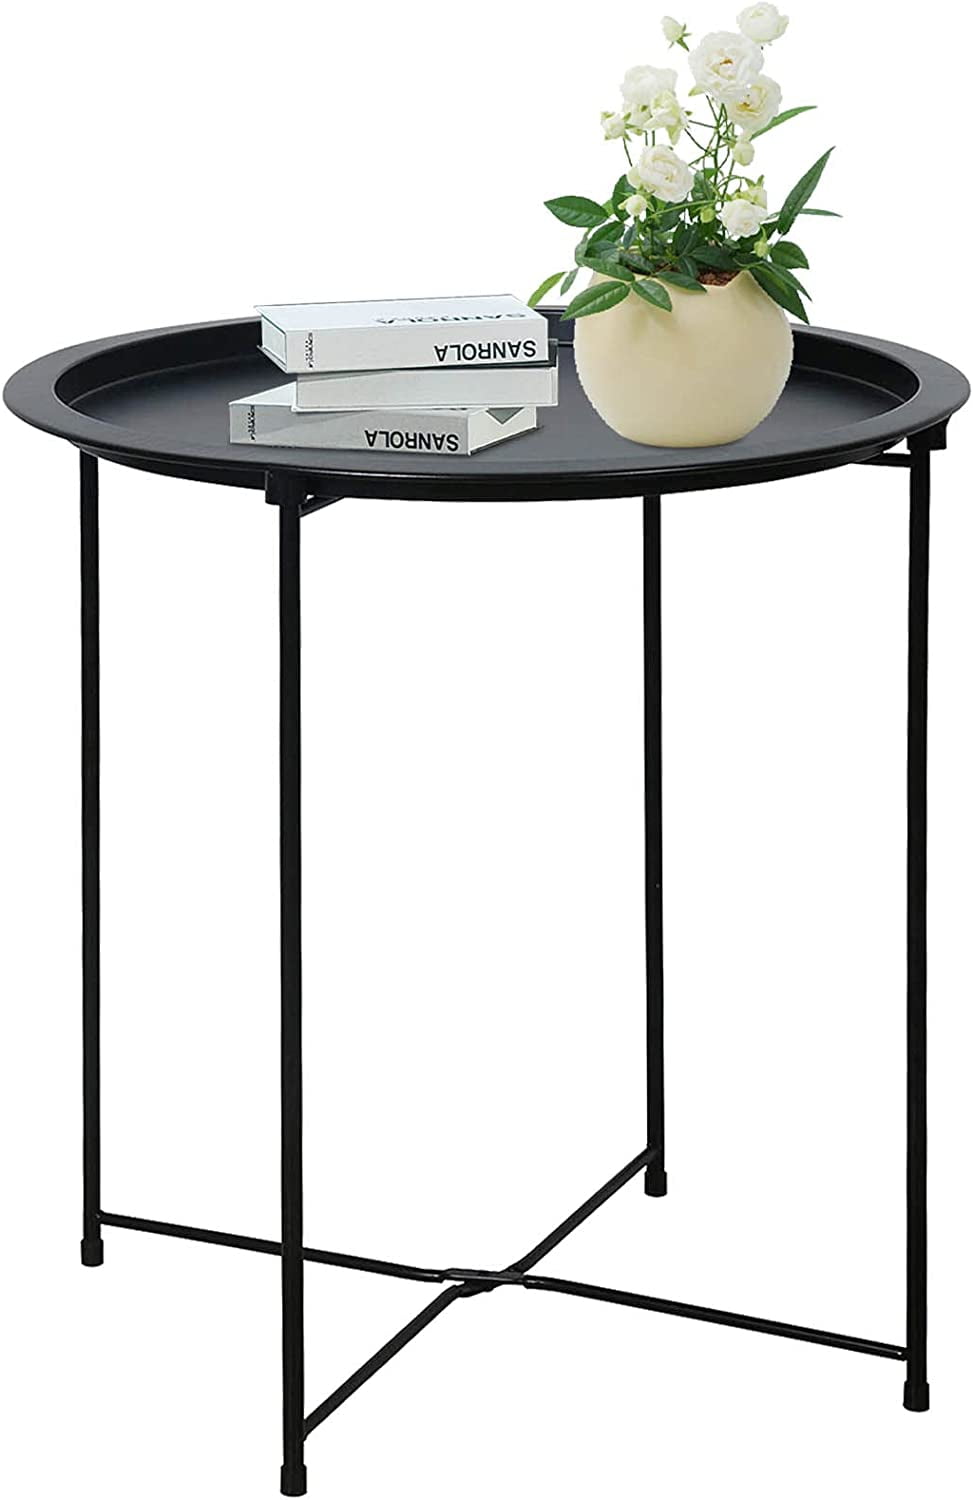 Folding Tray Metal Side Table Black Round End Table Cyan Sofa Small ...